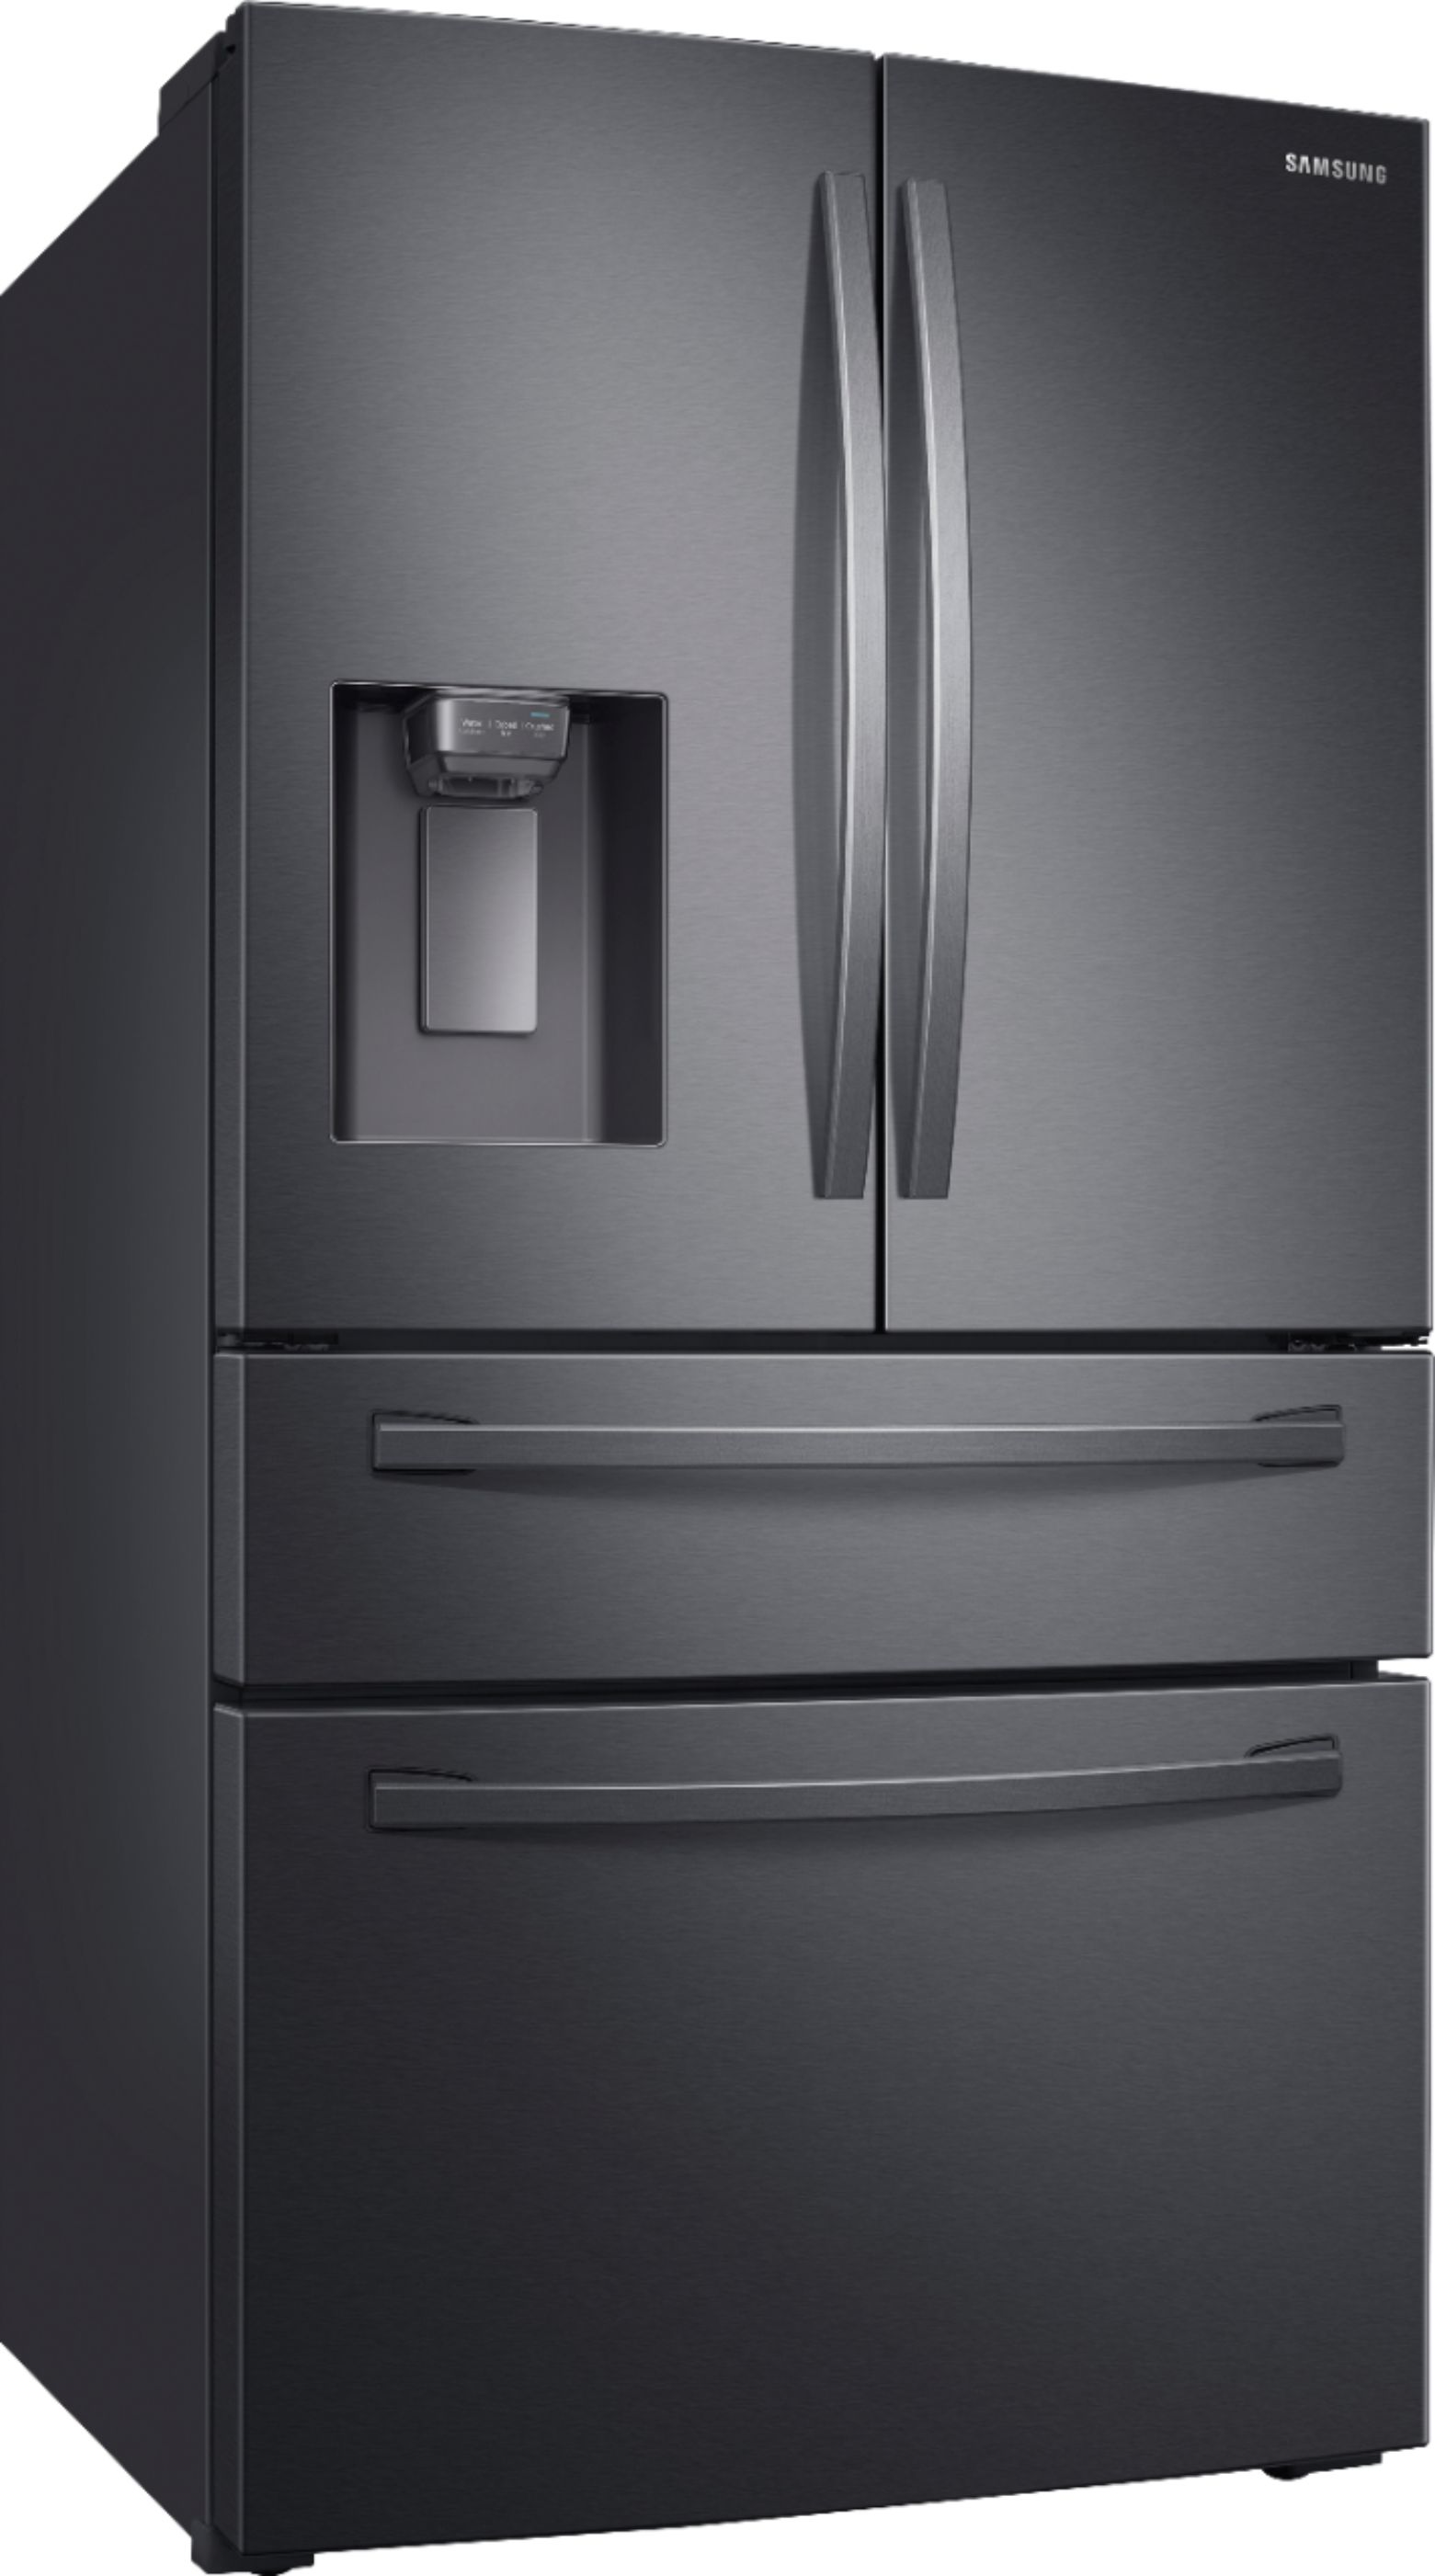 Angle View: Samsung - 22.6 cu. ft. 4-Door French Door Counter Depth Refrigerator with FlexZone™ Drawer - Black stainless steel